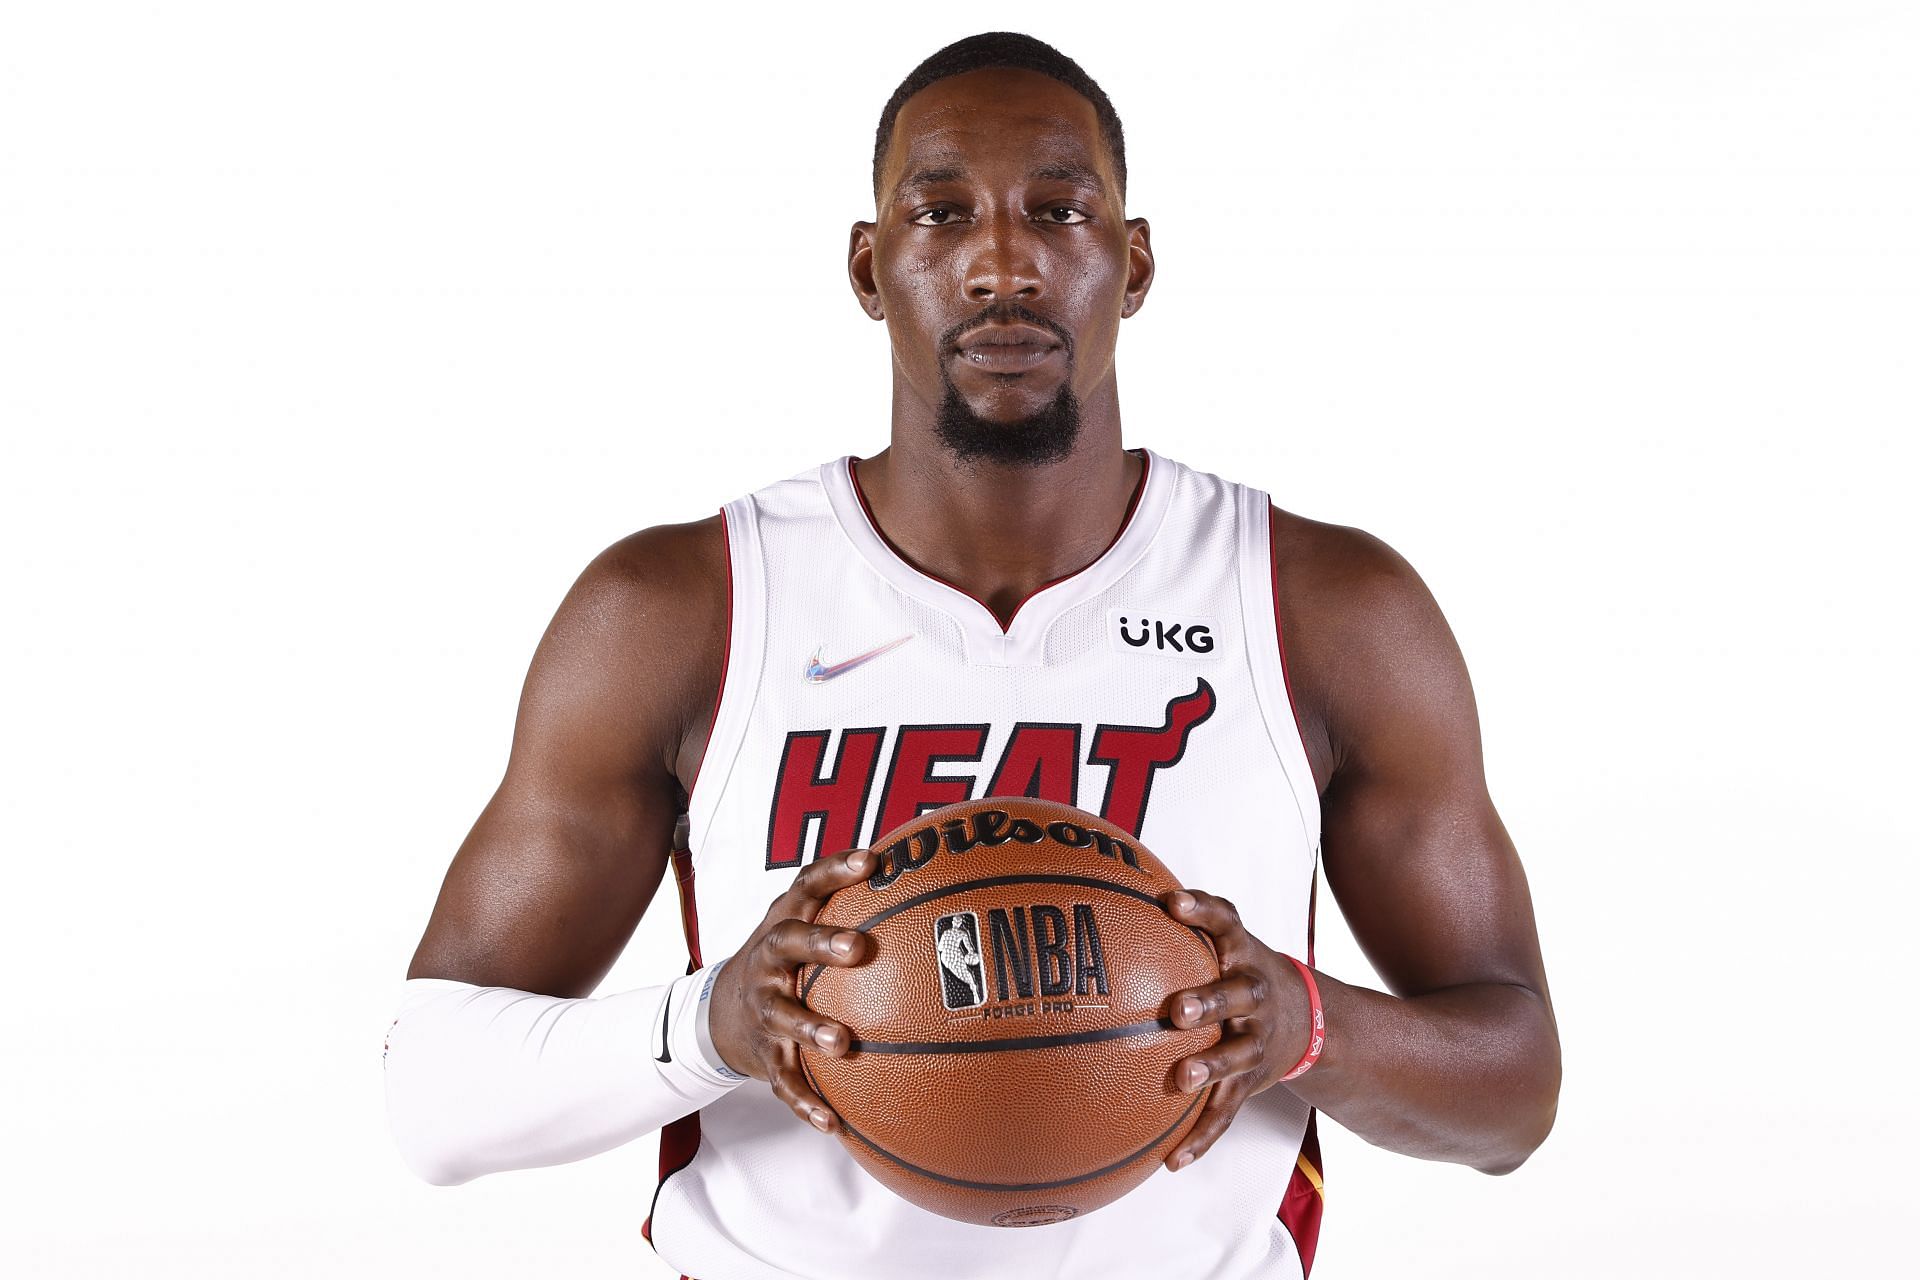 Bam Adebayo and the Miami Heat suffered a 17-point loss to the Boston Celtics on Thursday